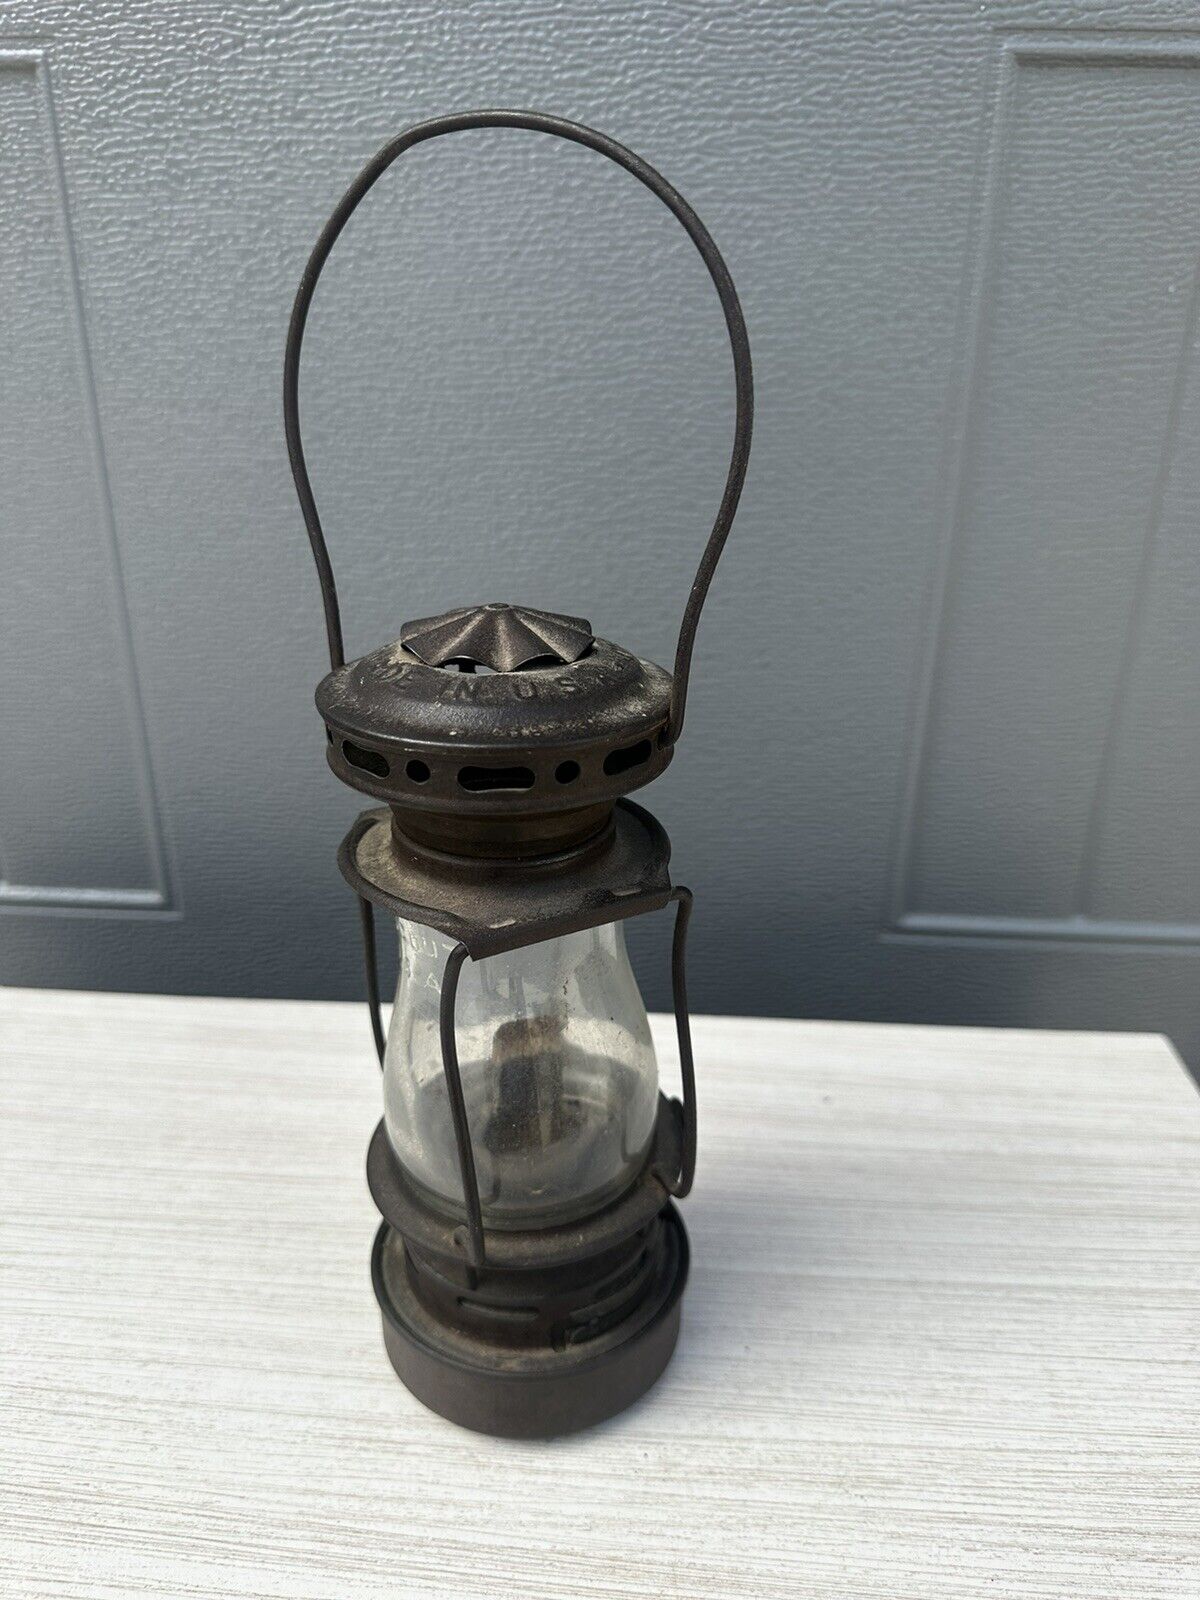 Dietz Scout Skater Lamp Lantern Nice Condition See Photos